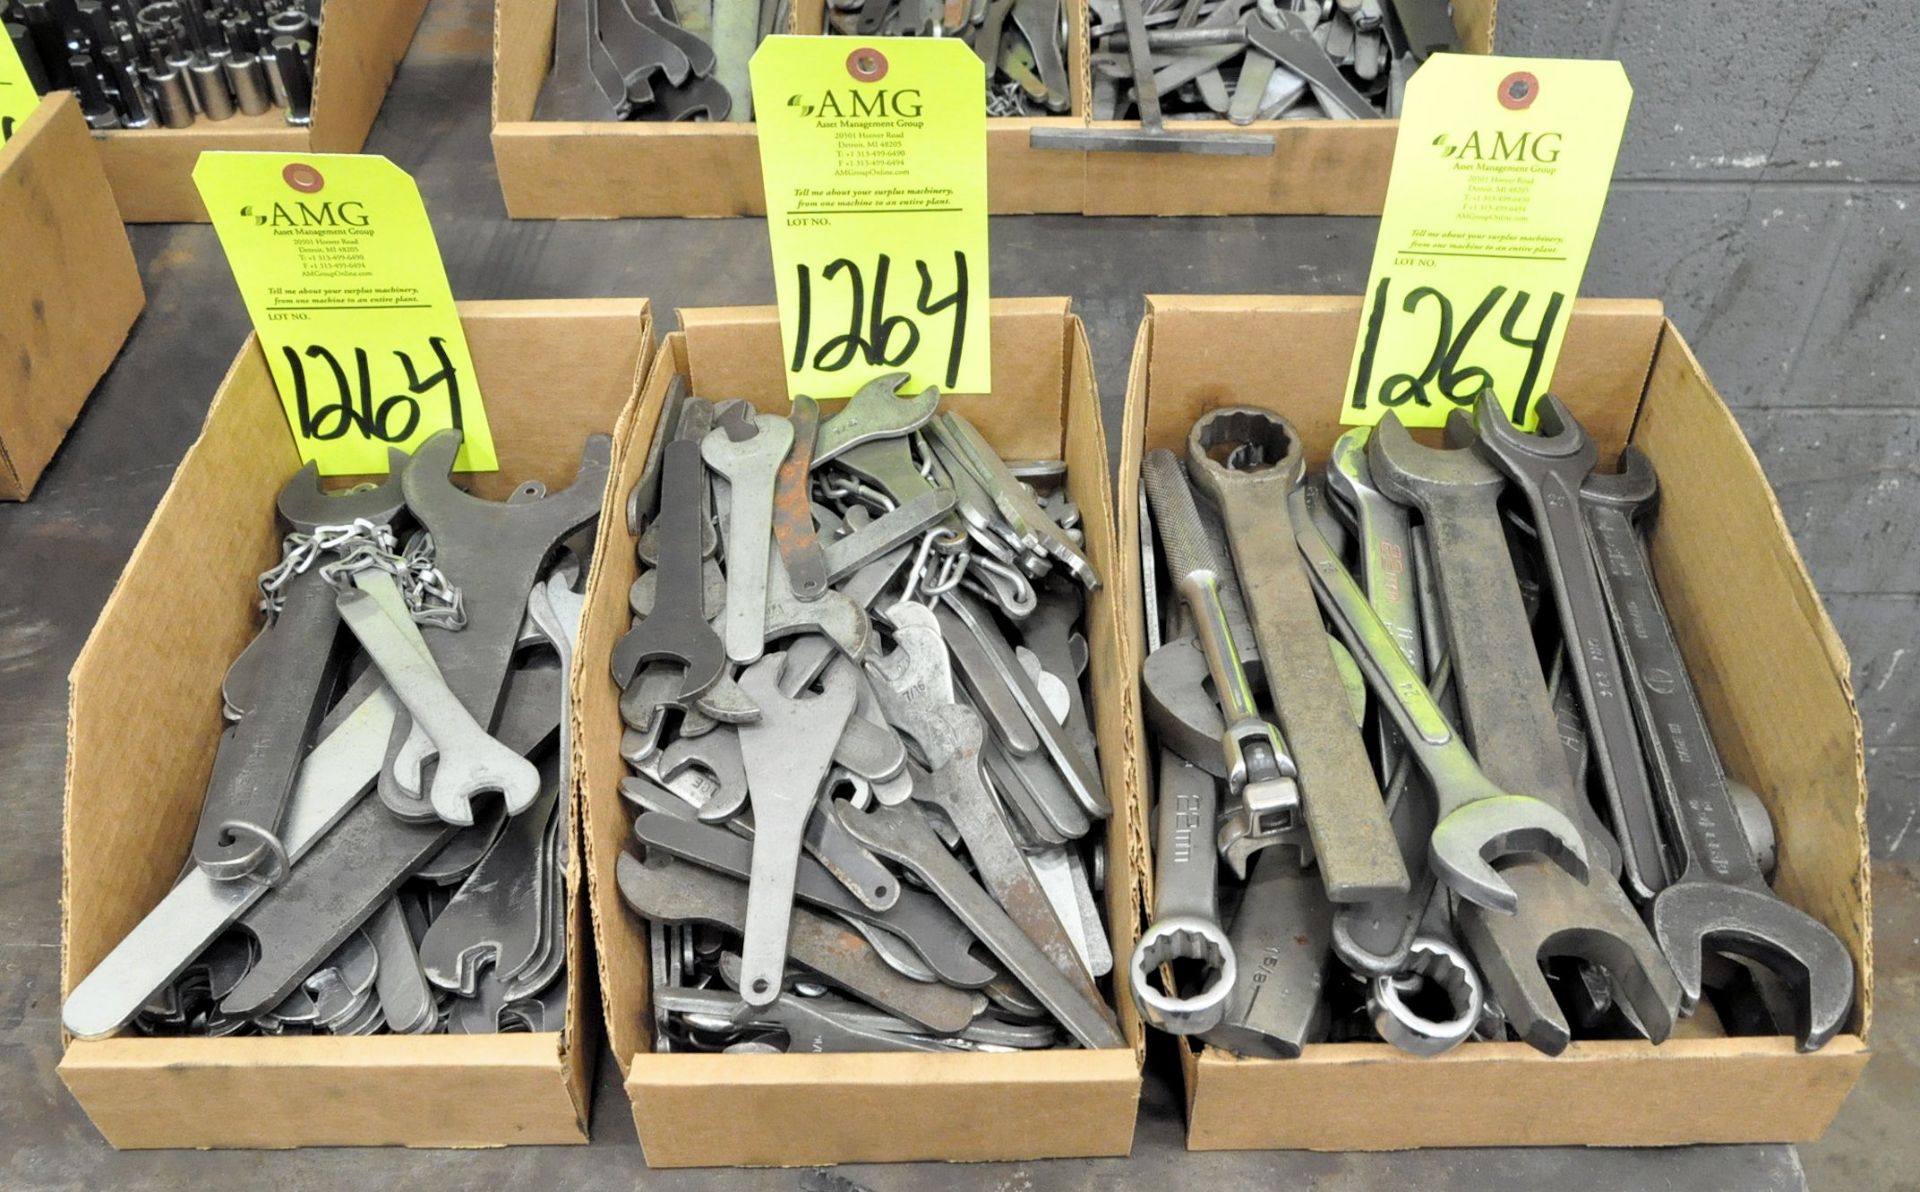 Lot-Asst'd Wrenches in (3) Boxes, (G-17), (Yellow Tag)